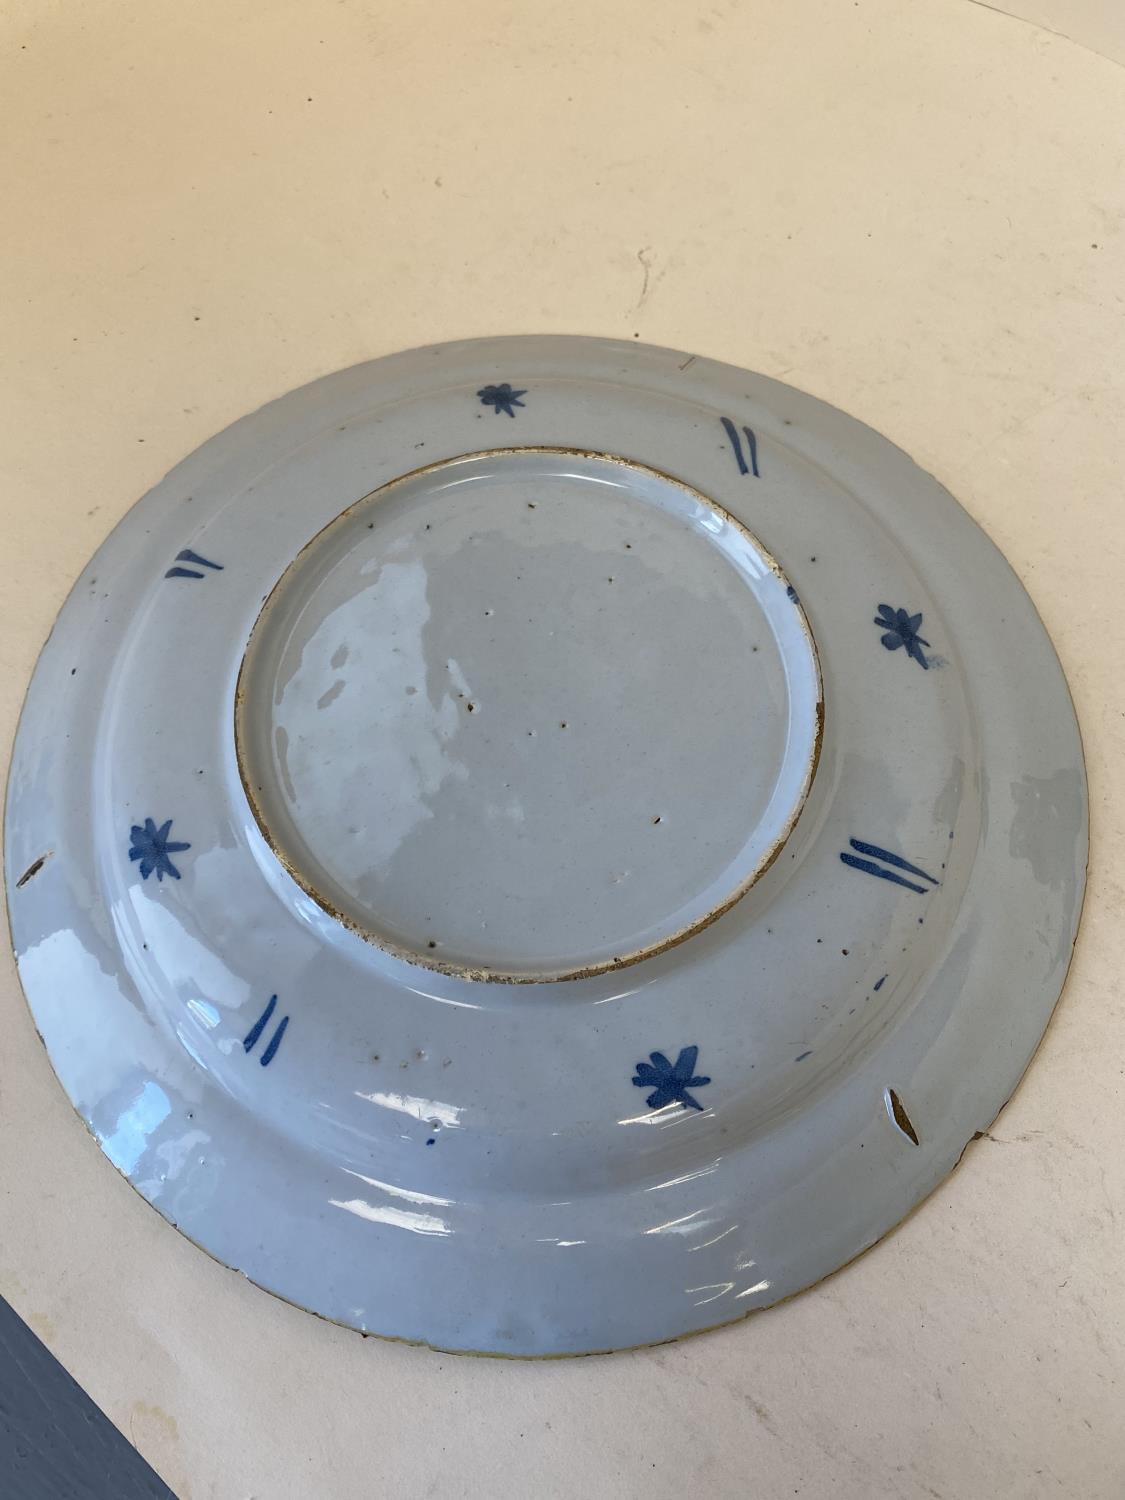 Tin glazed Delft plate 29cm diam, (rim chipped), Imari circular plate cracked and a florally - Image 8 of 8